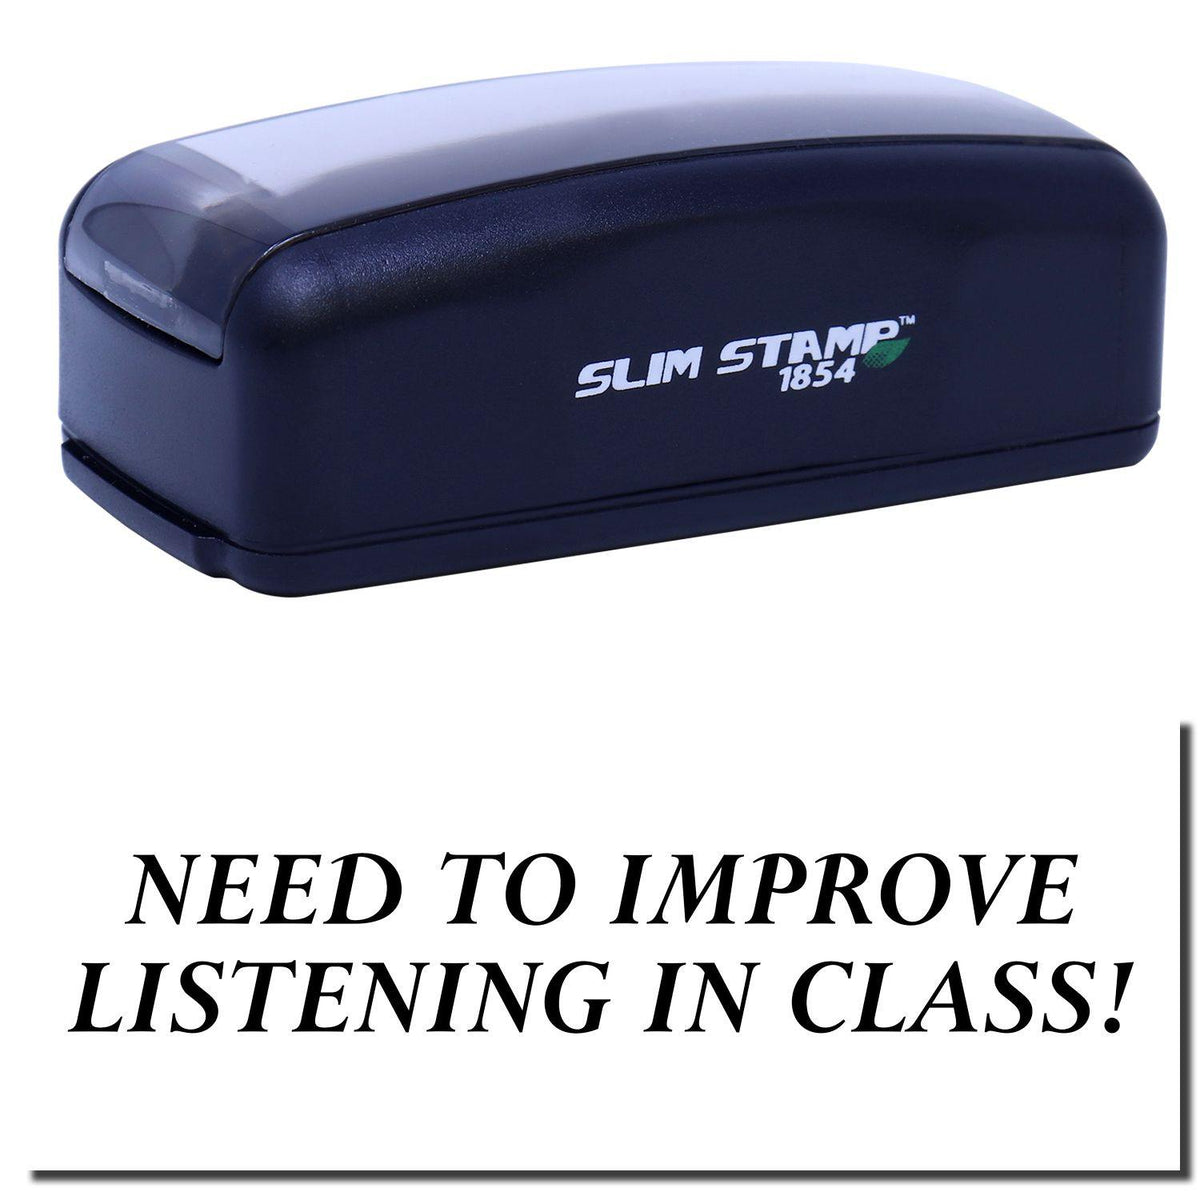 A stock office pre-inked stamp with a stamped image showing how the text &quot;NEED TO IMPROVE LISTENING IN CLASS!&quot; in a large font is displayed after stamping.